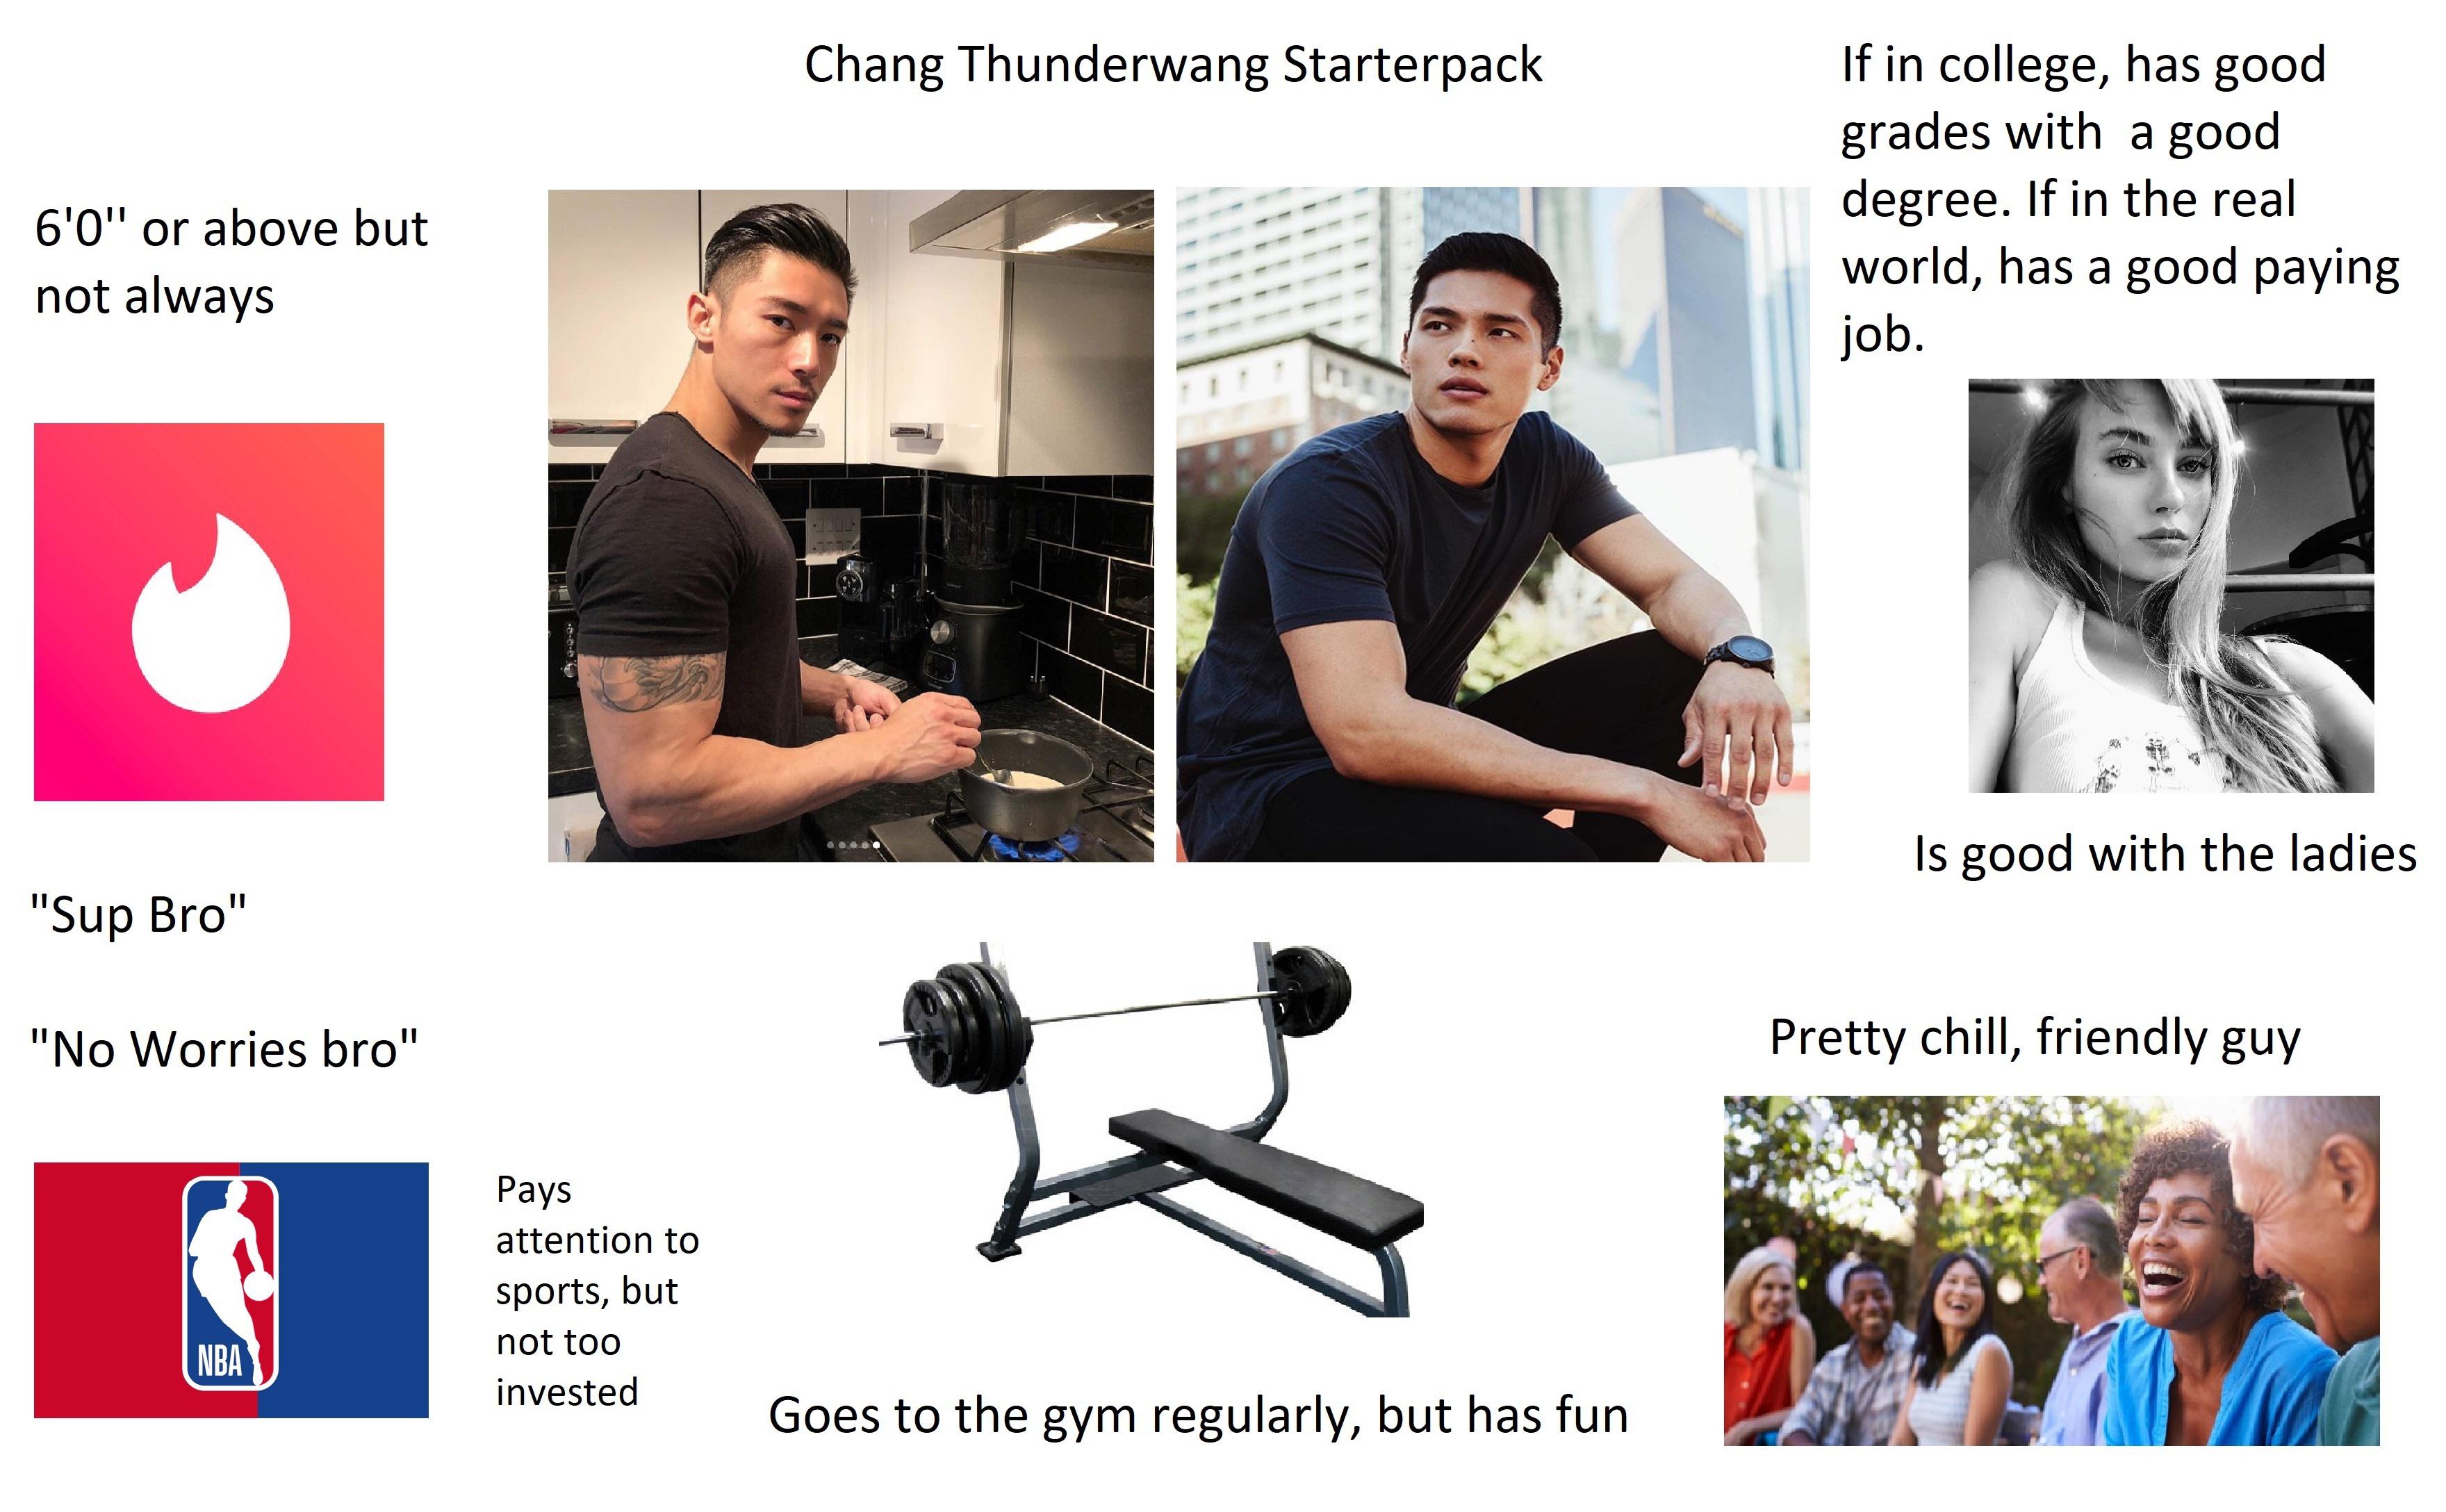 chang chad - Chang Thunderwang Starterpack 6'0" or above but not always If in college, has good grades with a good degree. If in the real world, has a good paying job. Is good with the ladies "Sup Bro" "No Worries bro" Pretty chill, friendly guy Pays atte